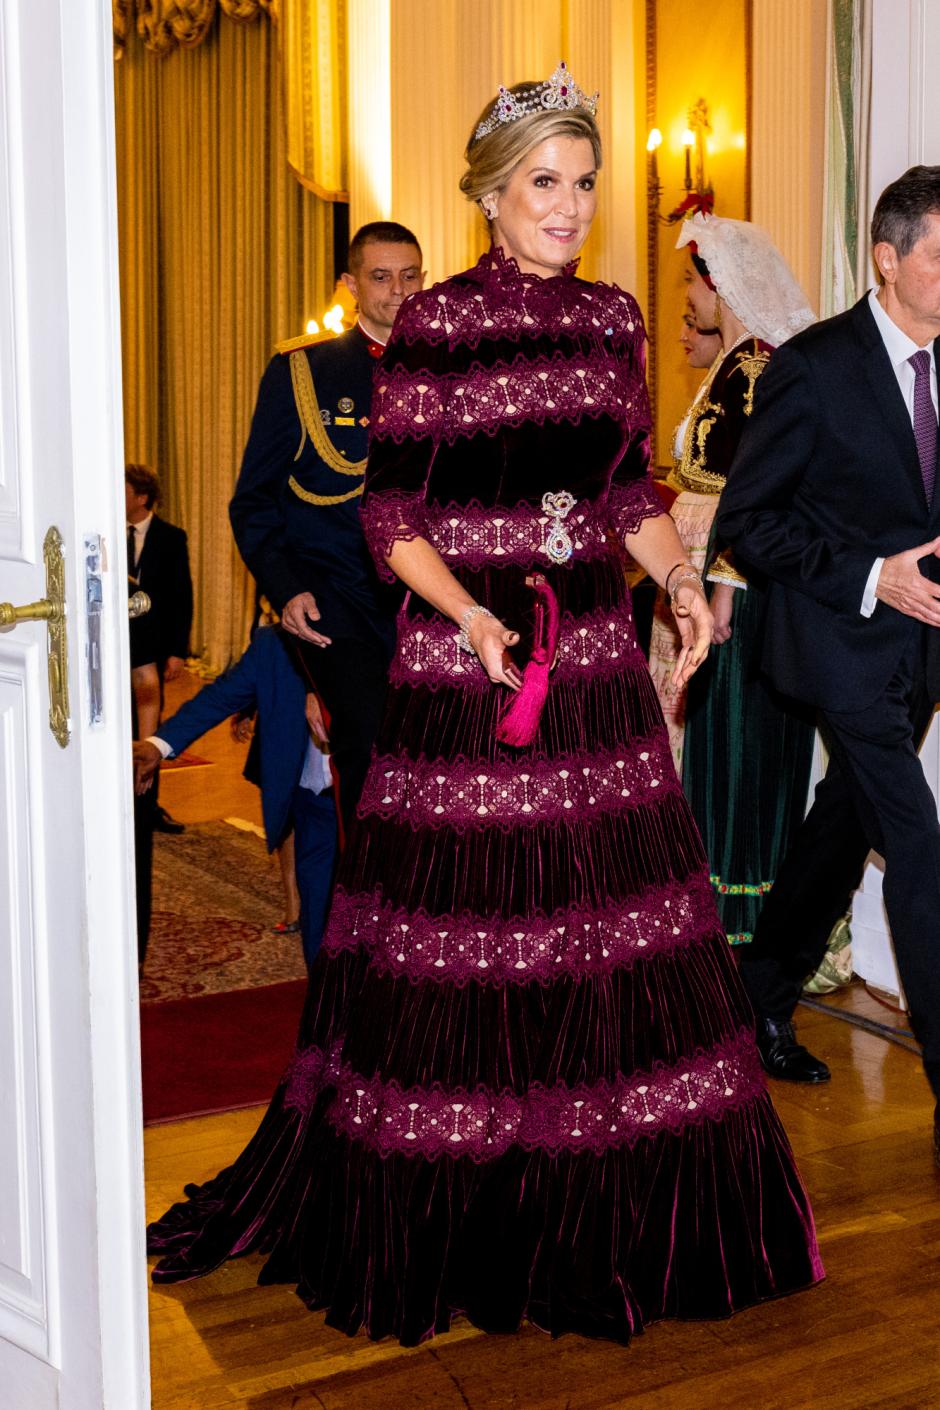 Queen Maxima Prior To The State Banquet In The Presidential Palace.